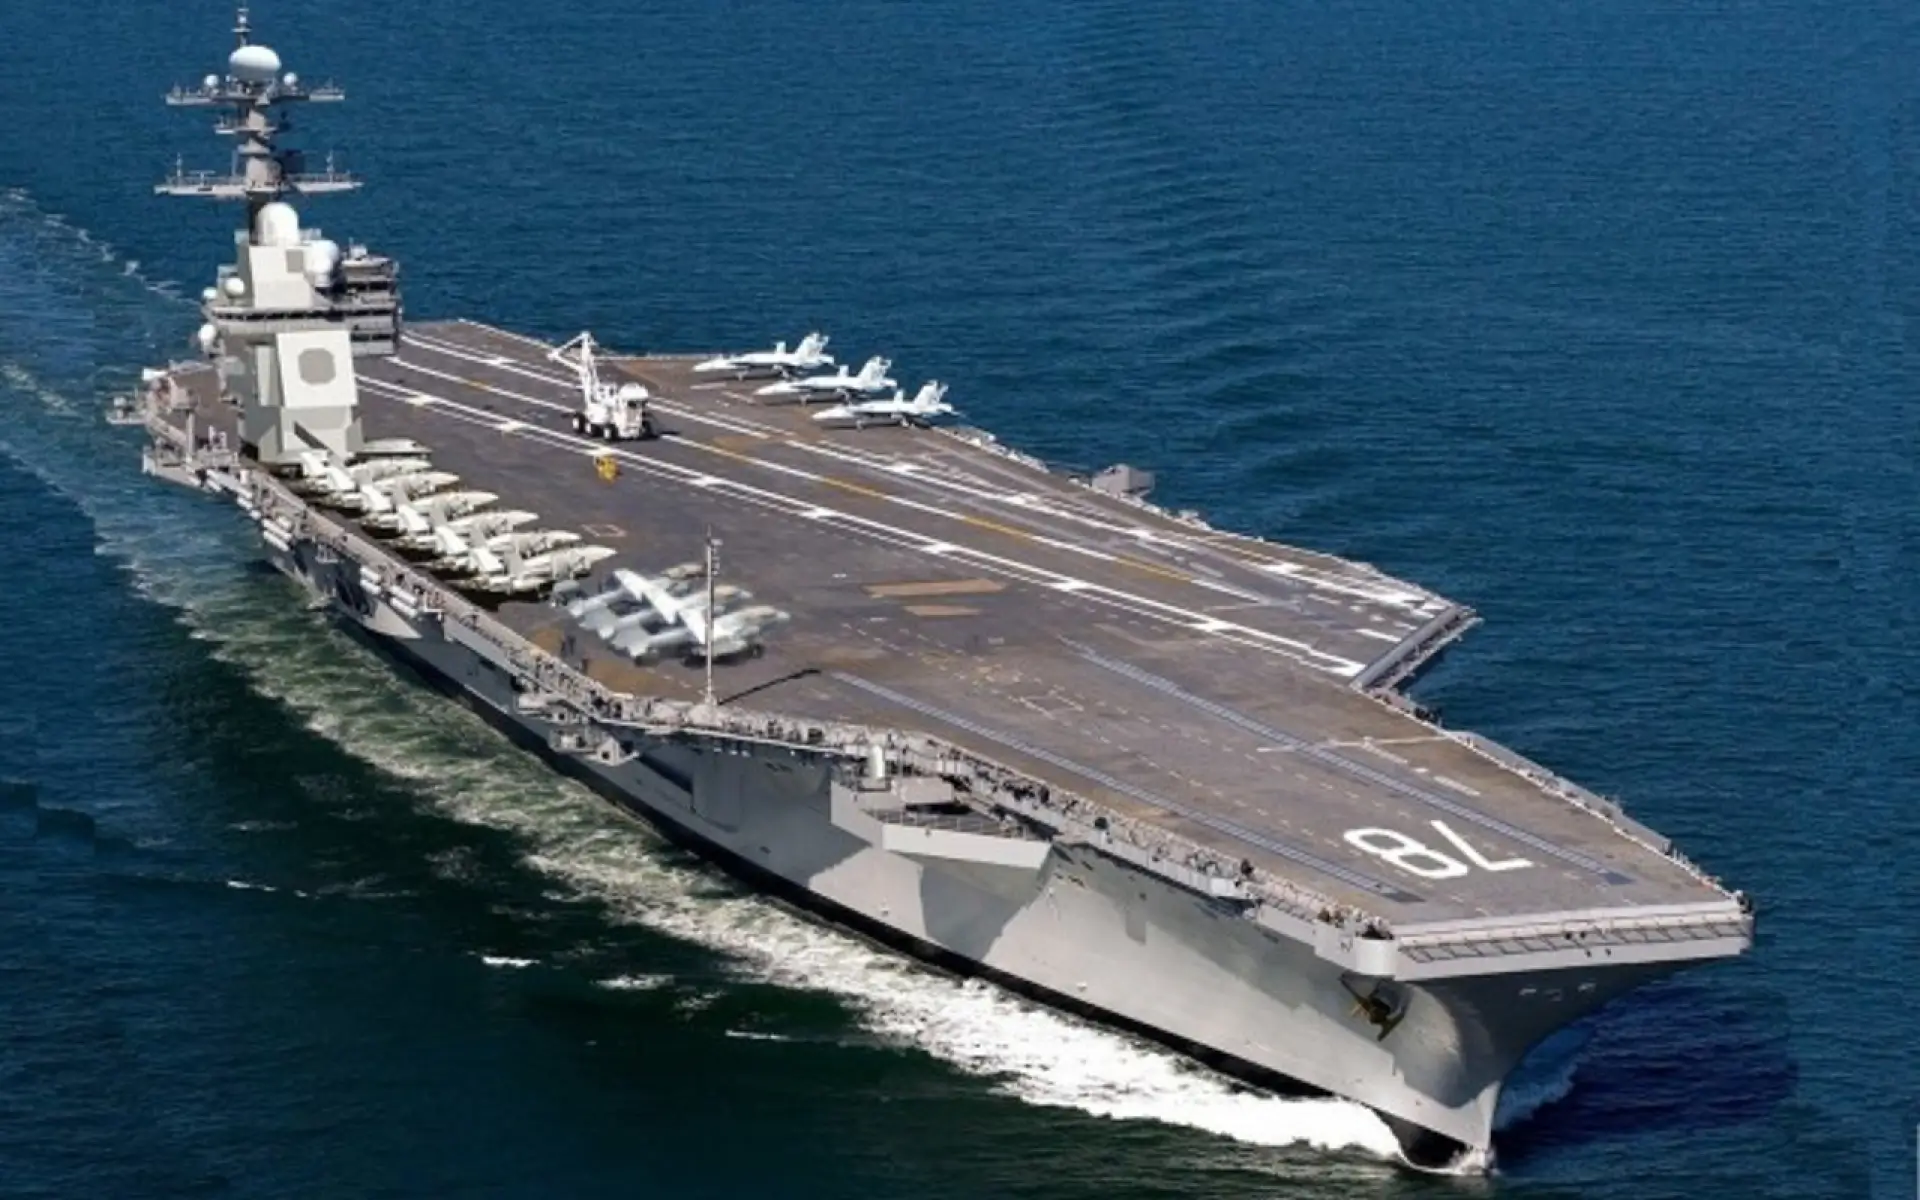 US Navy’s largest aircraft carrier returning to the US after extended deployment in the Mediterranean